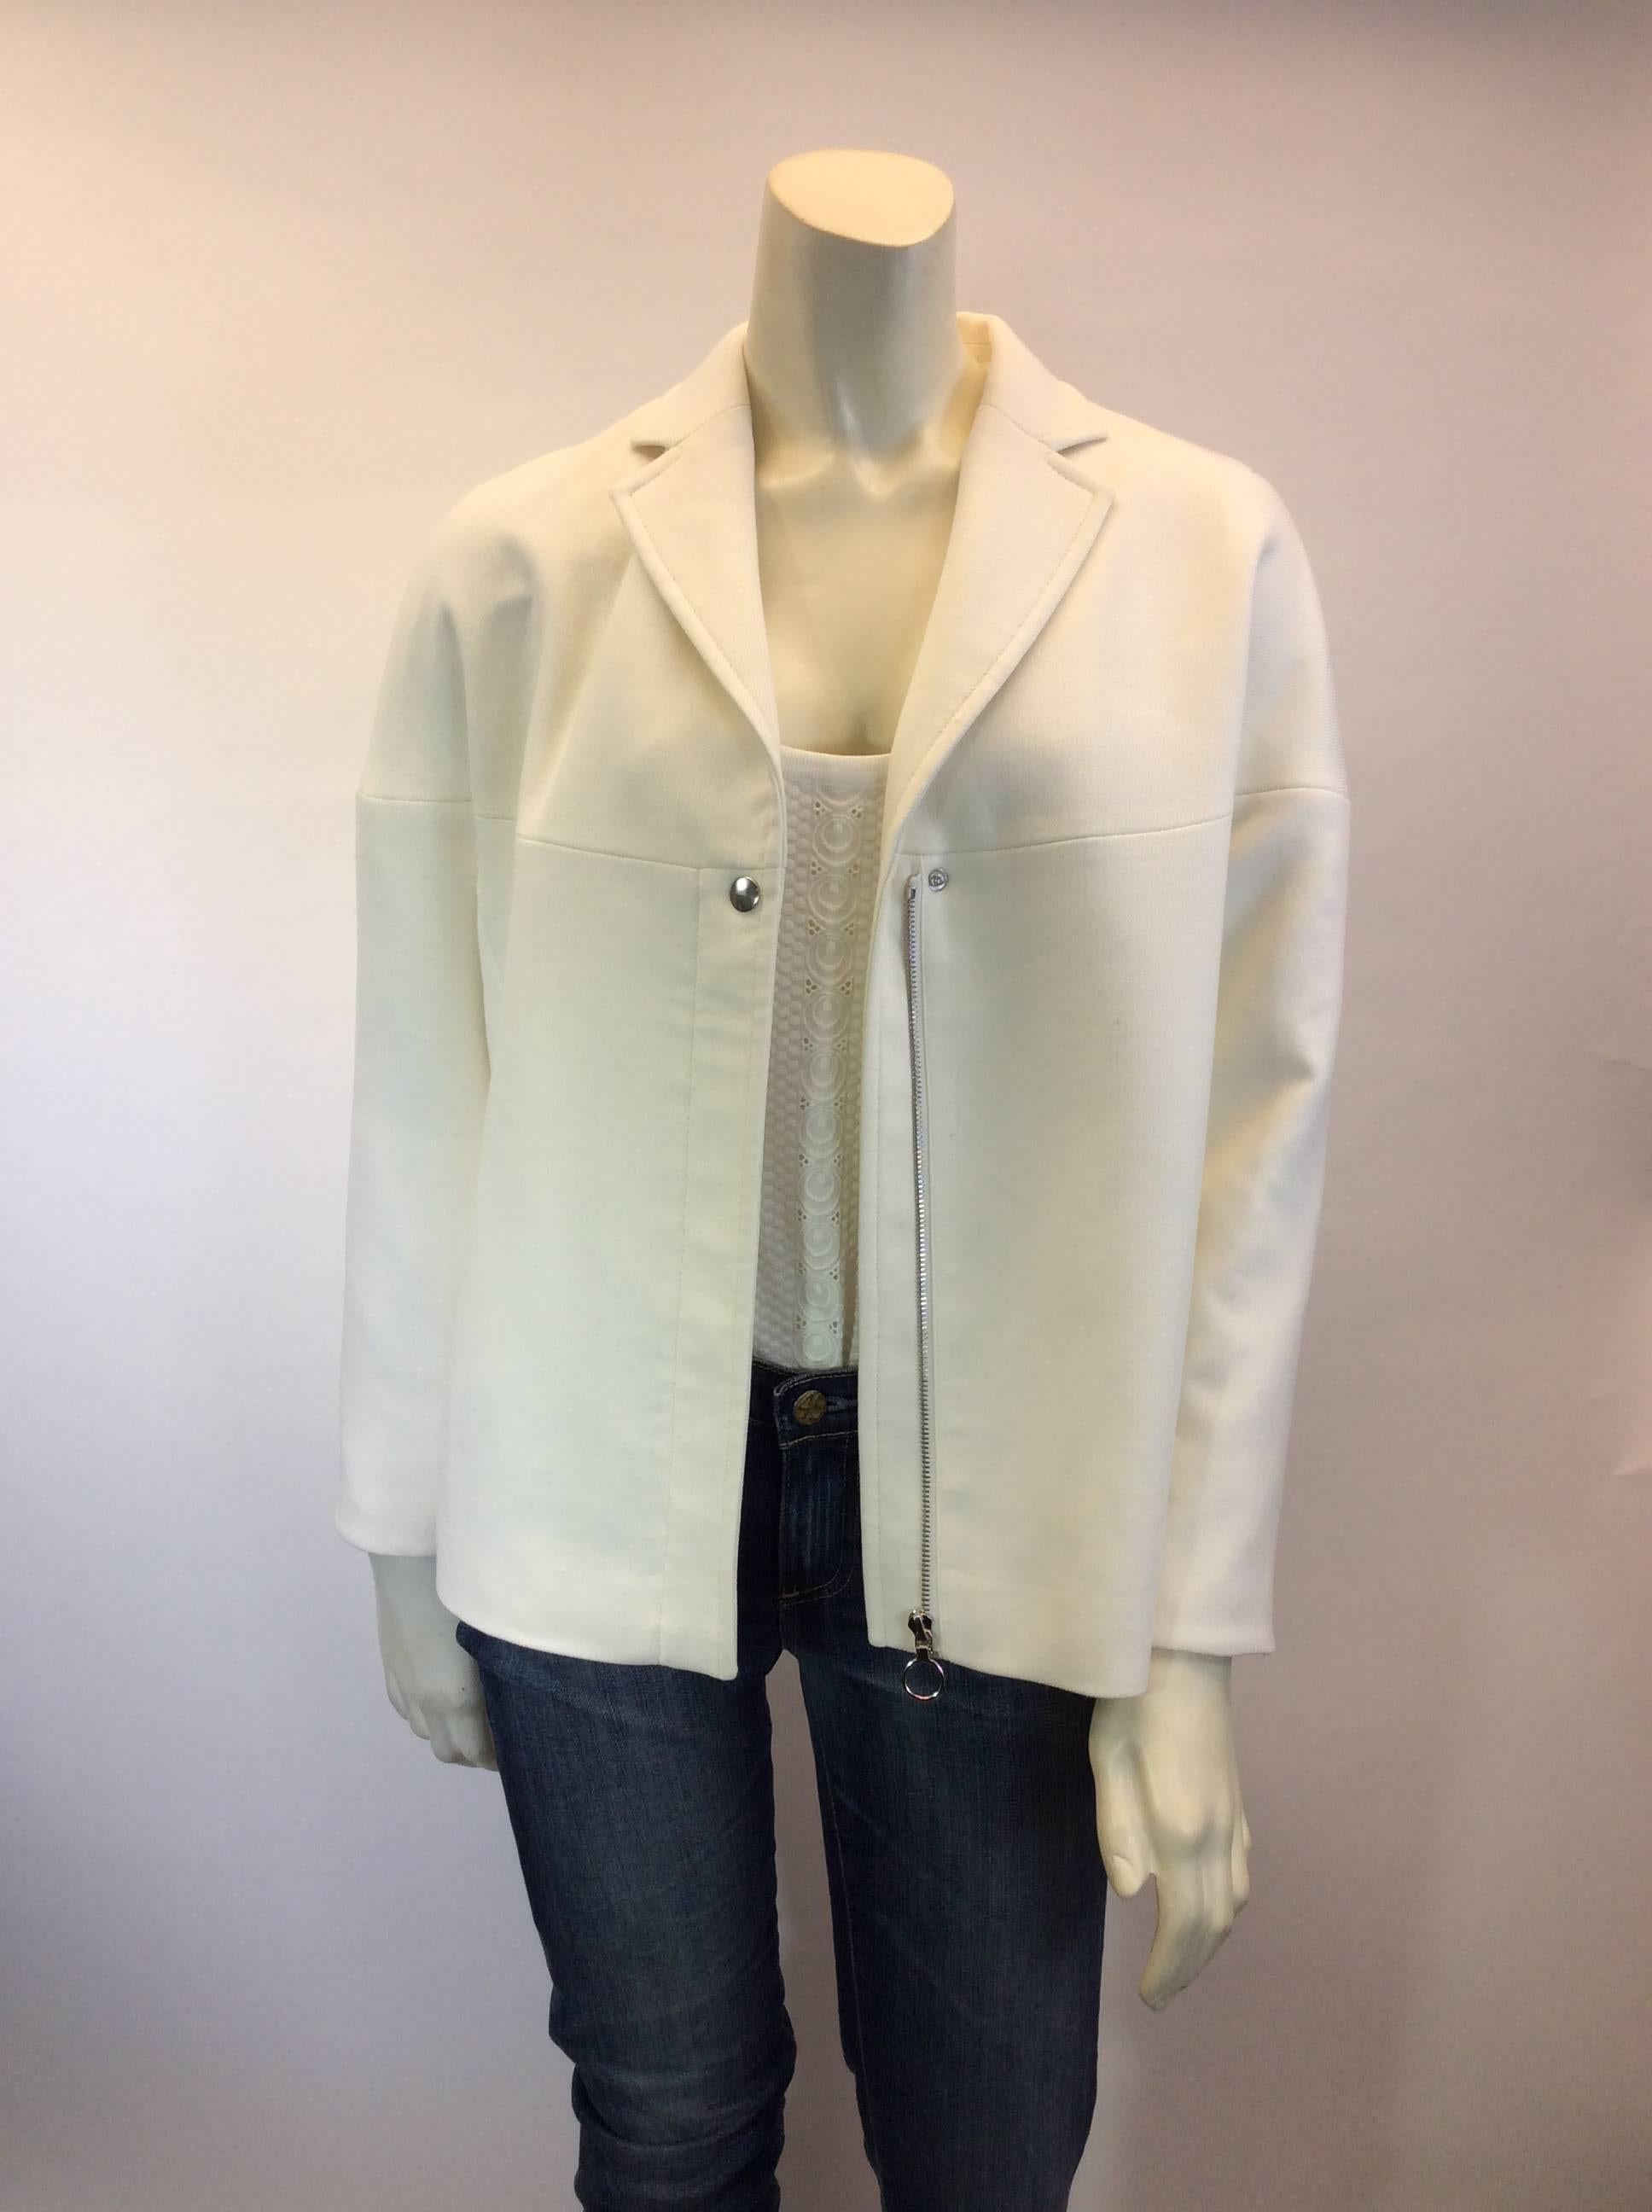 White Zipped Boxy Blazer
Includes center front zipper and snap closures
Hip length
Size 4
52% Polyester, 43% Wool, 5% Elastic shell, 96% Acetate, 4% Elastic lining